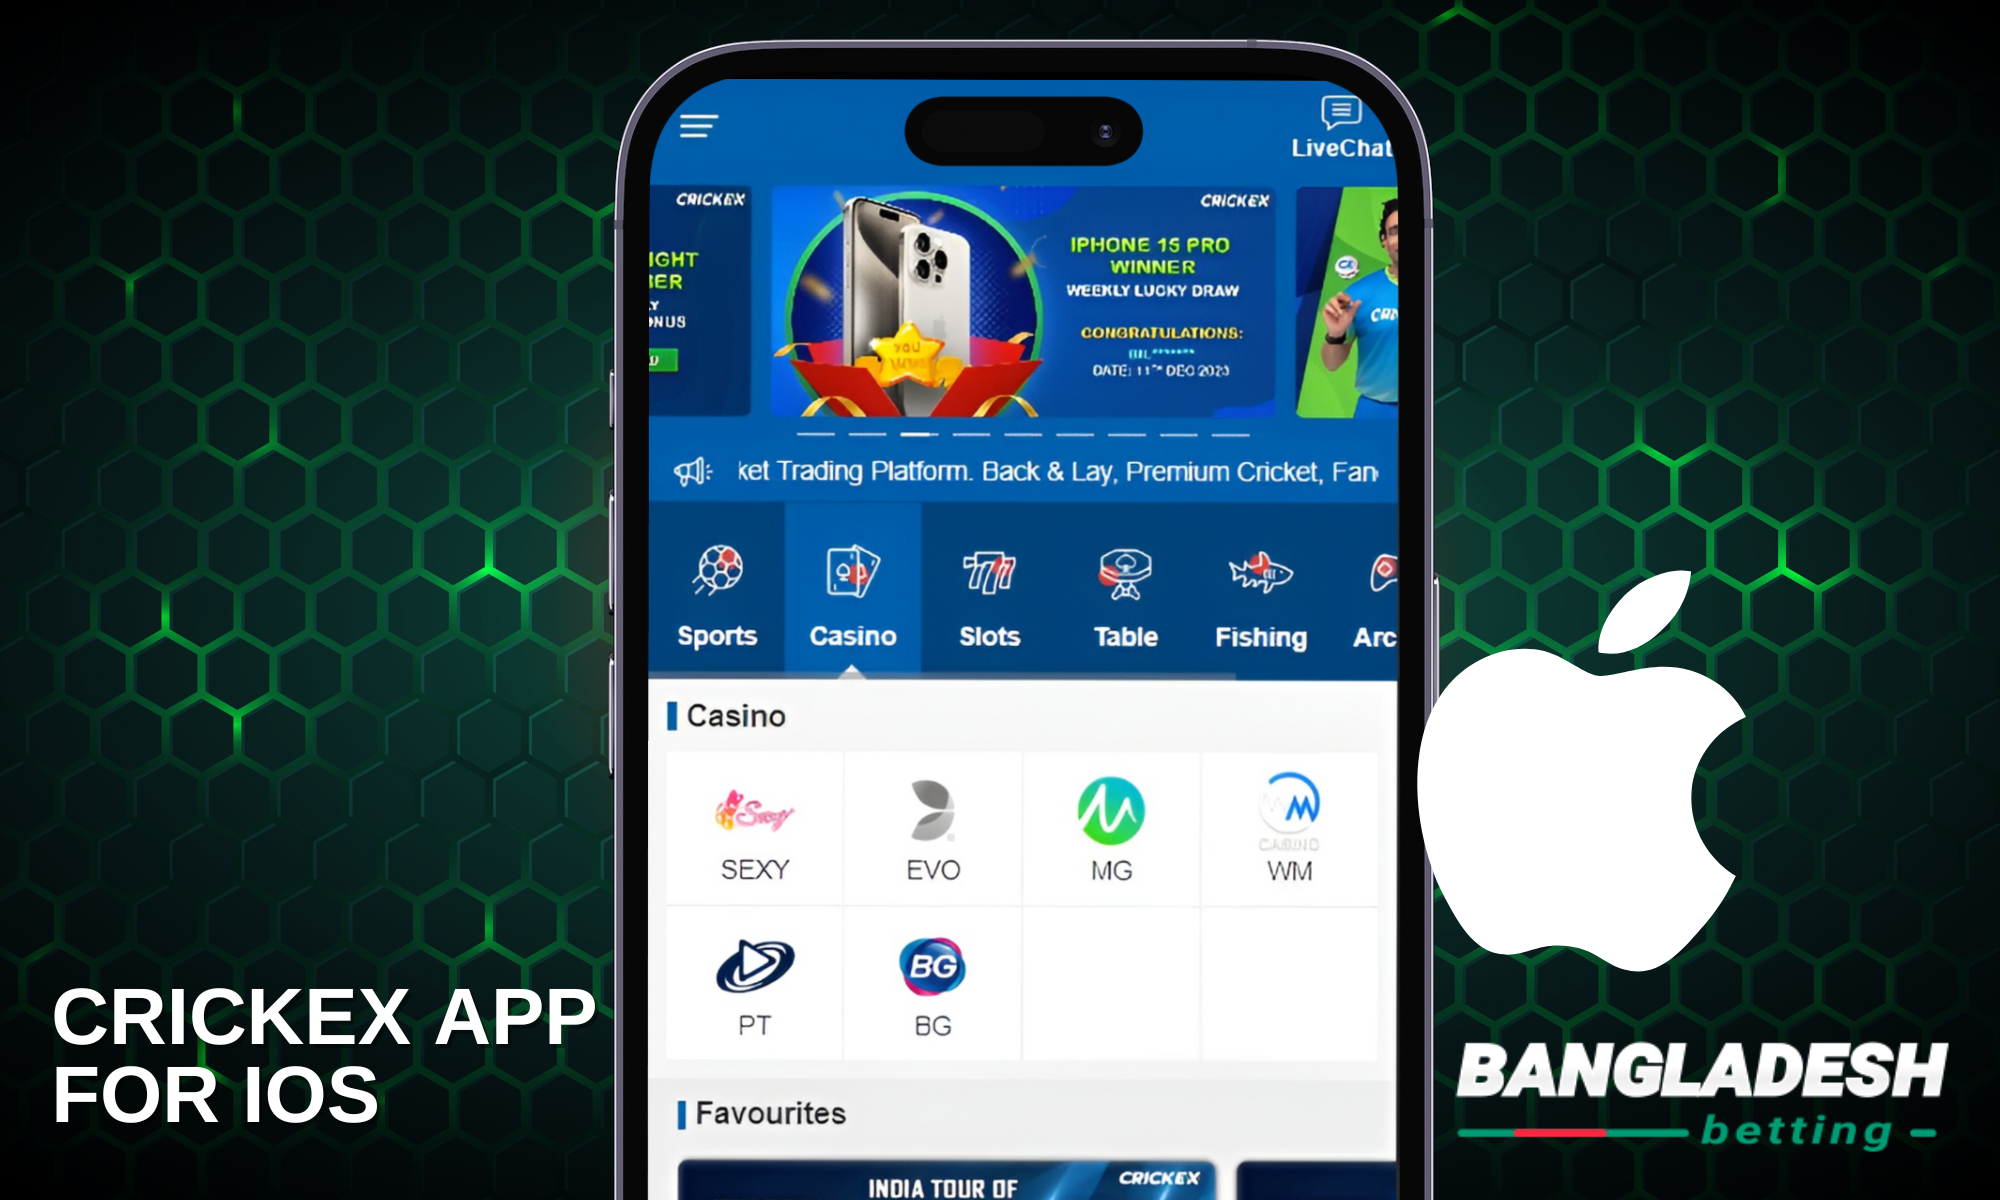 Crickex iOS app is available for iPhone users